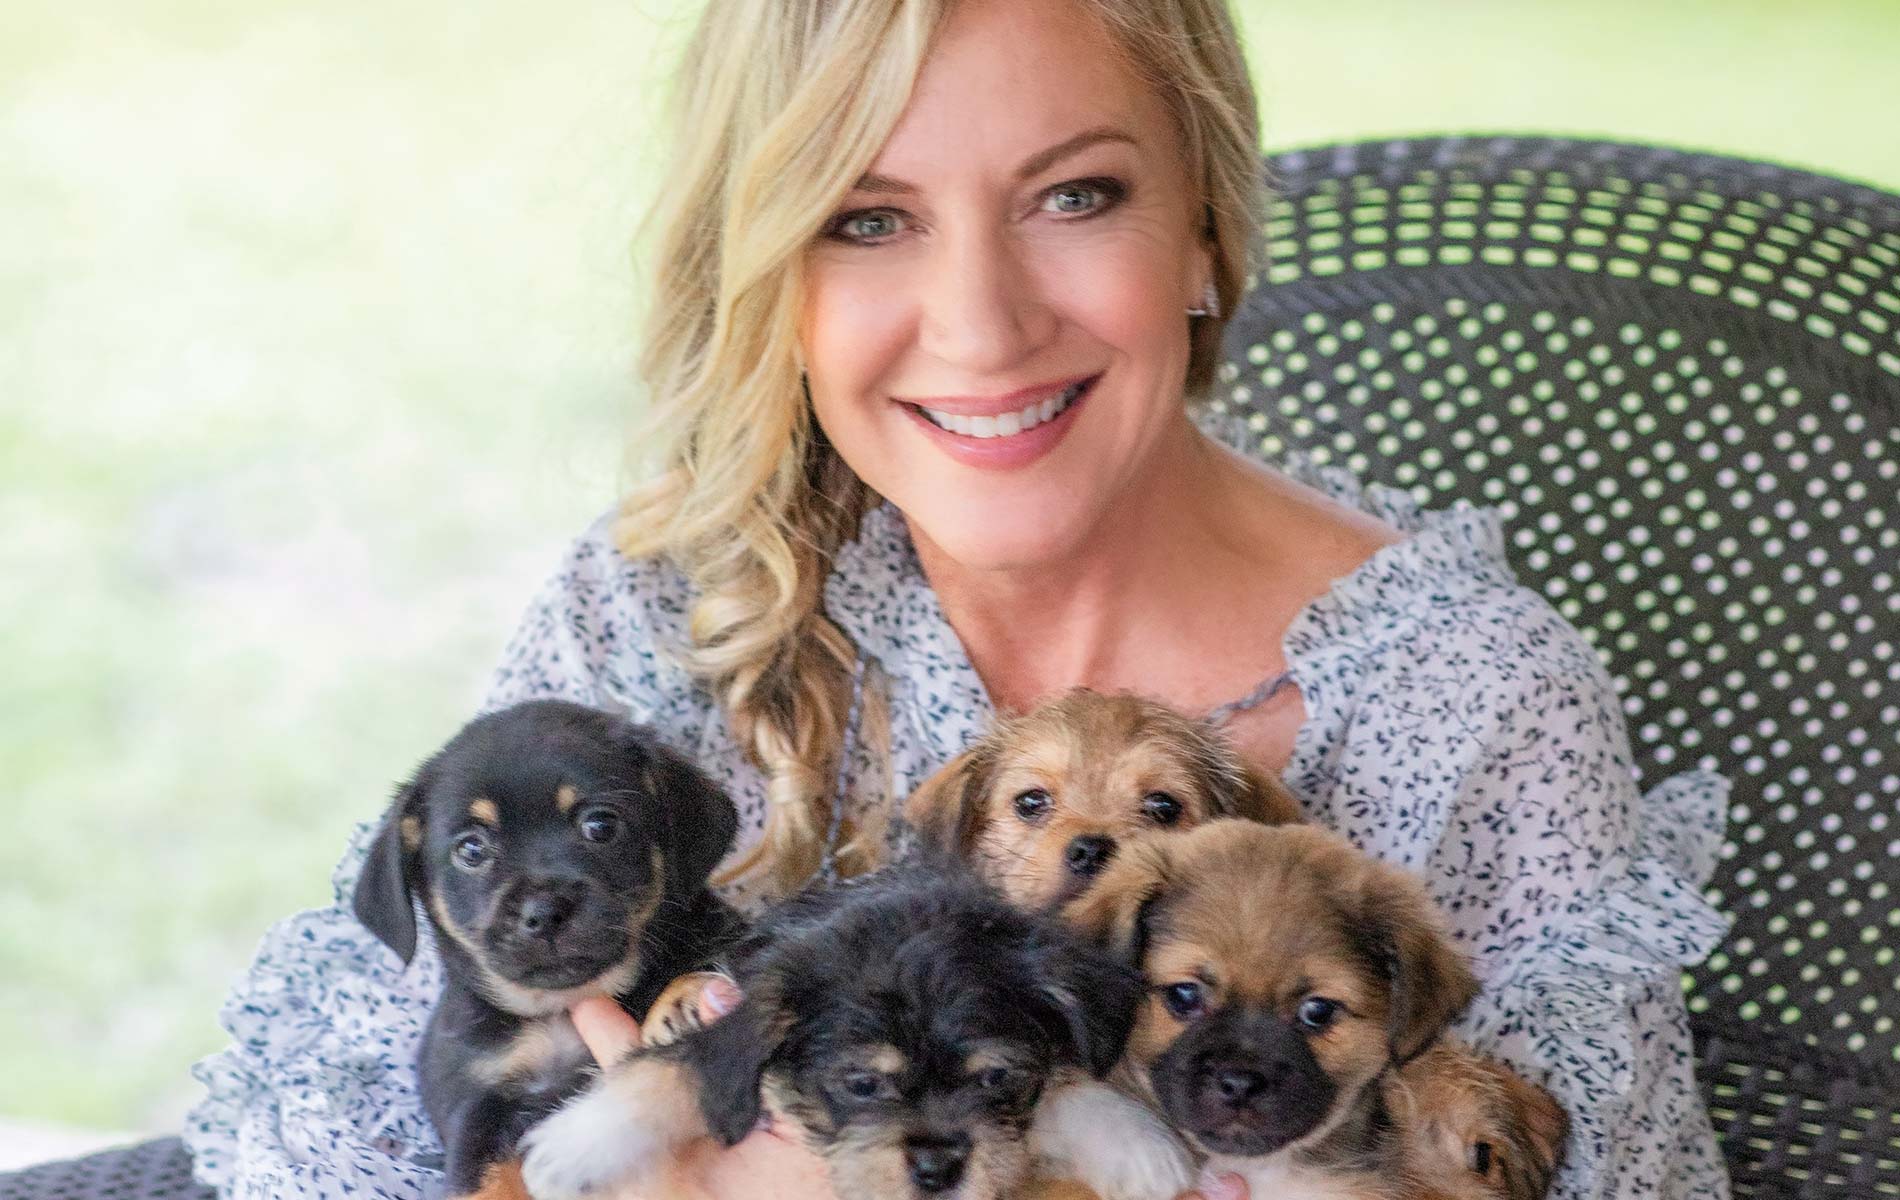 Laurie Hood with a recent rescue of adorable six-week-old puppies at the Alaqua Animal Refuge